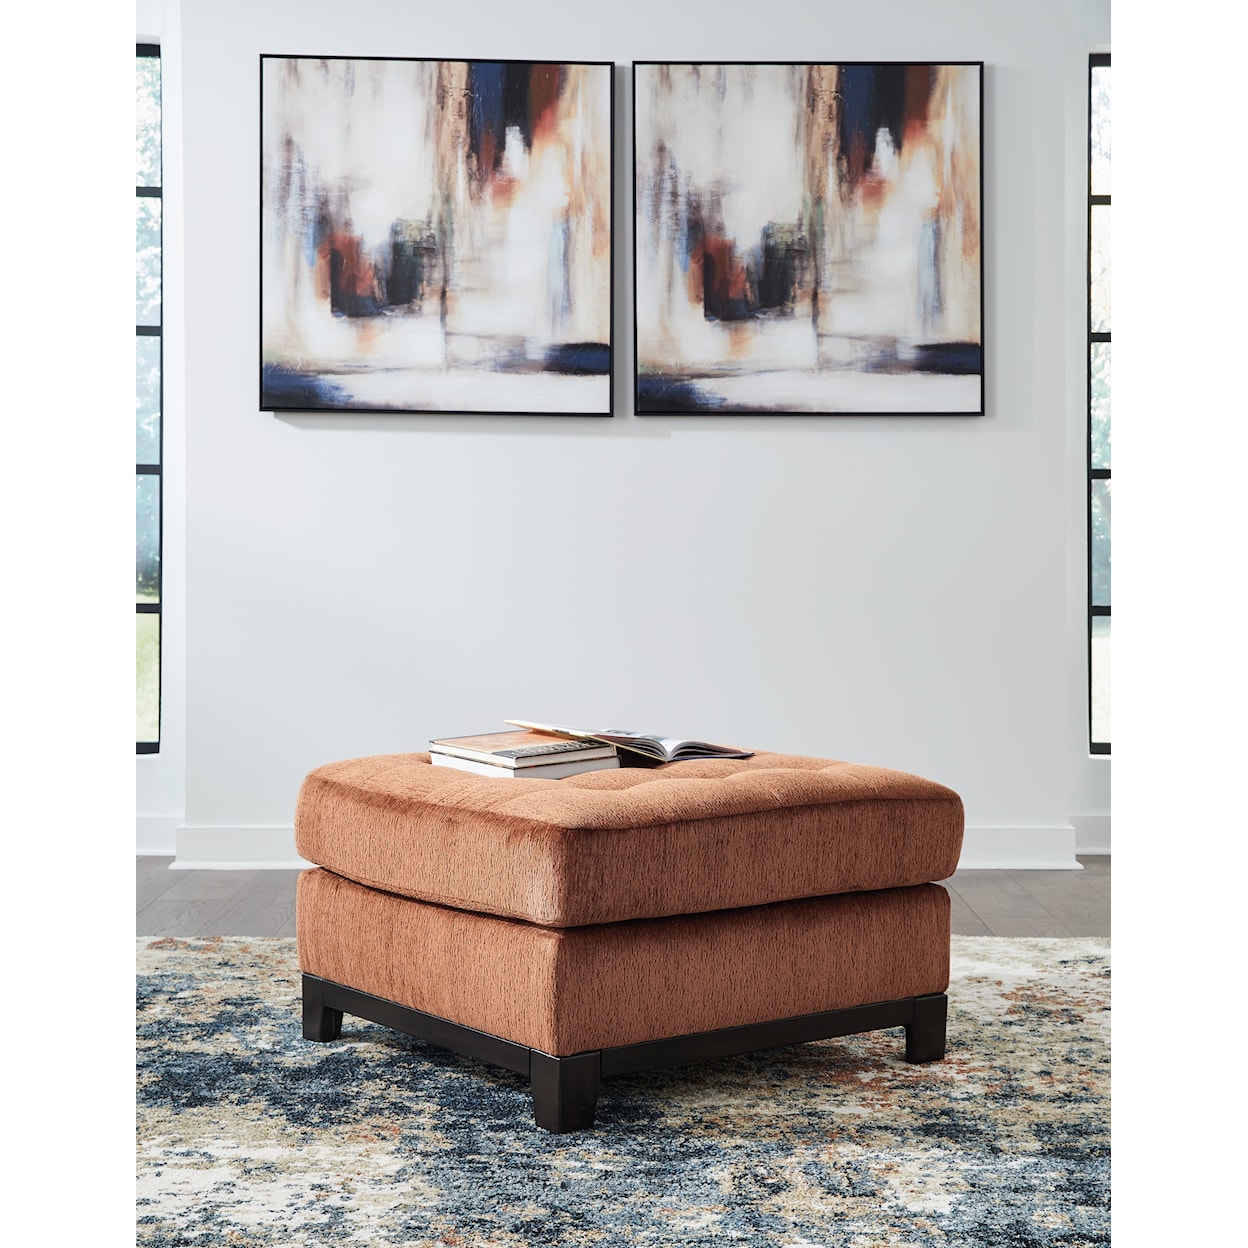 Signature Design by Ashley Furniture Laylabrook Oversized Accent Ottoman